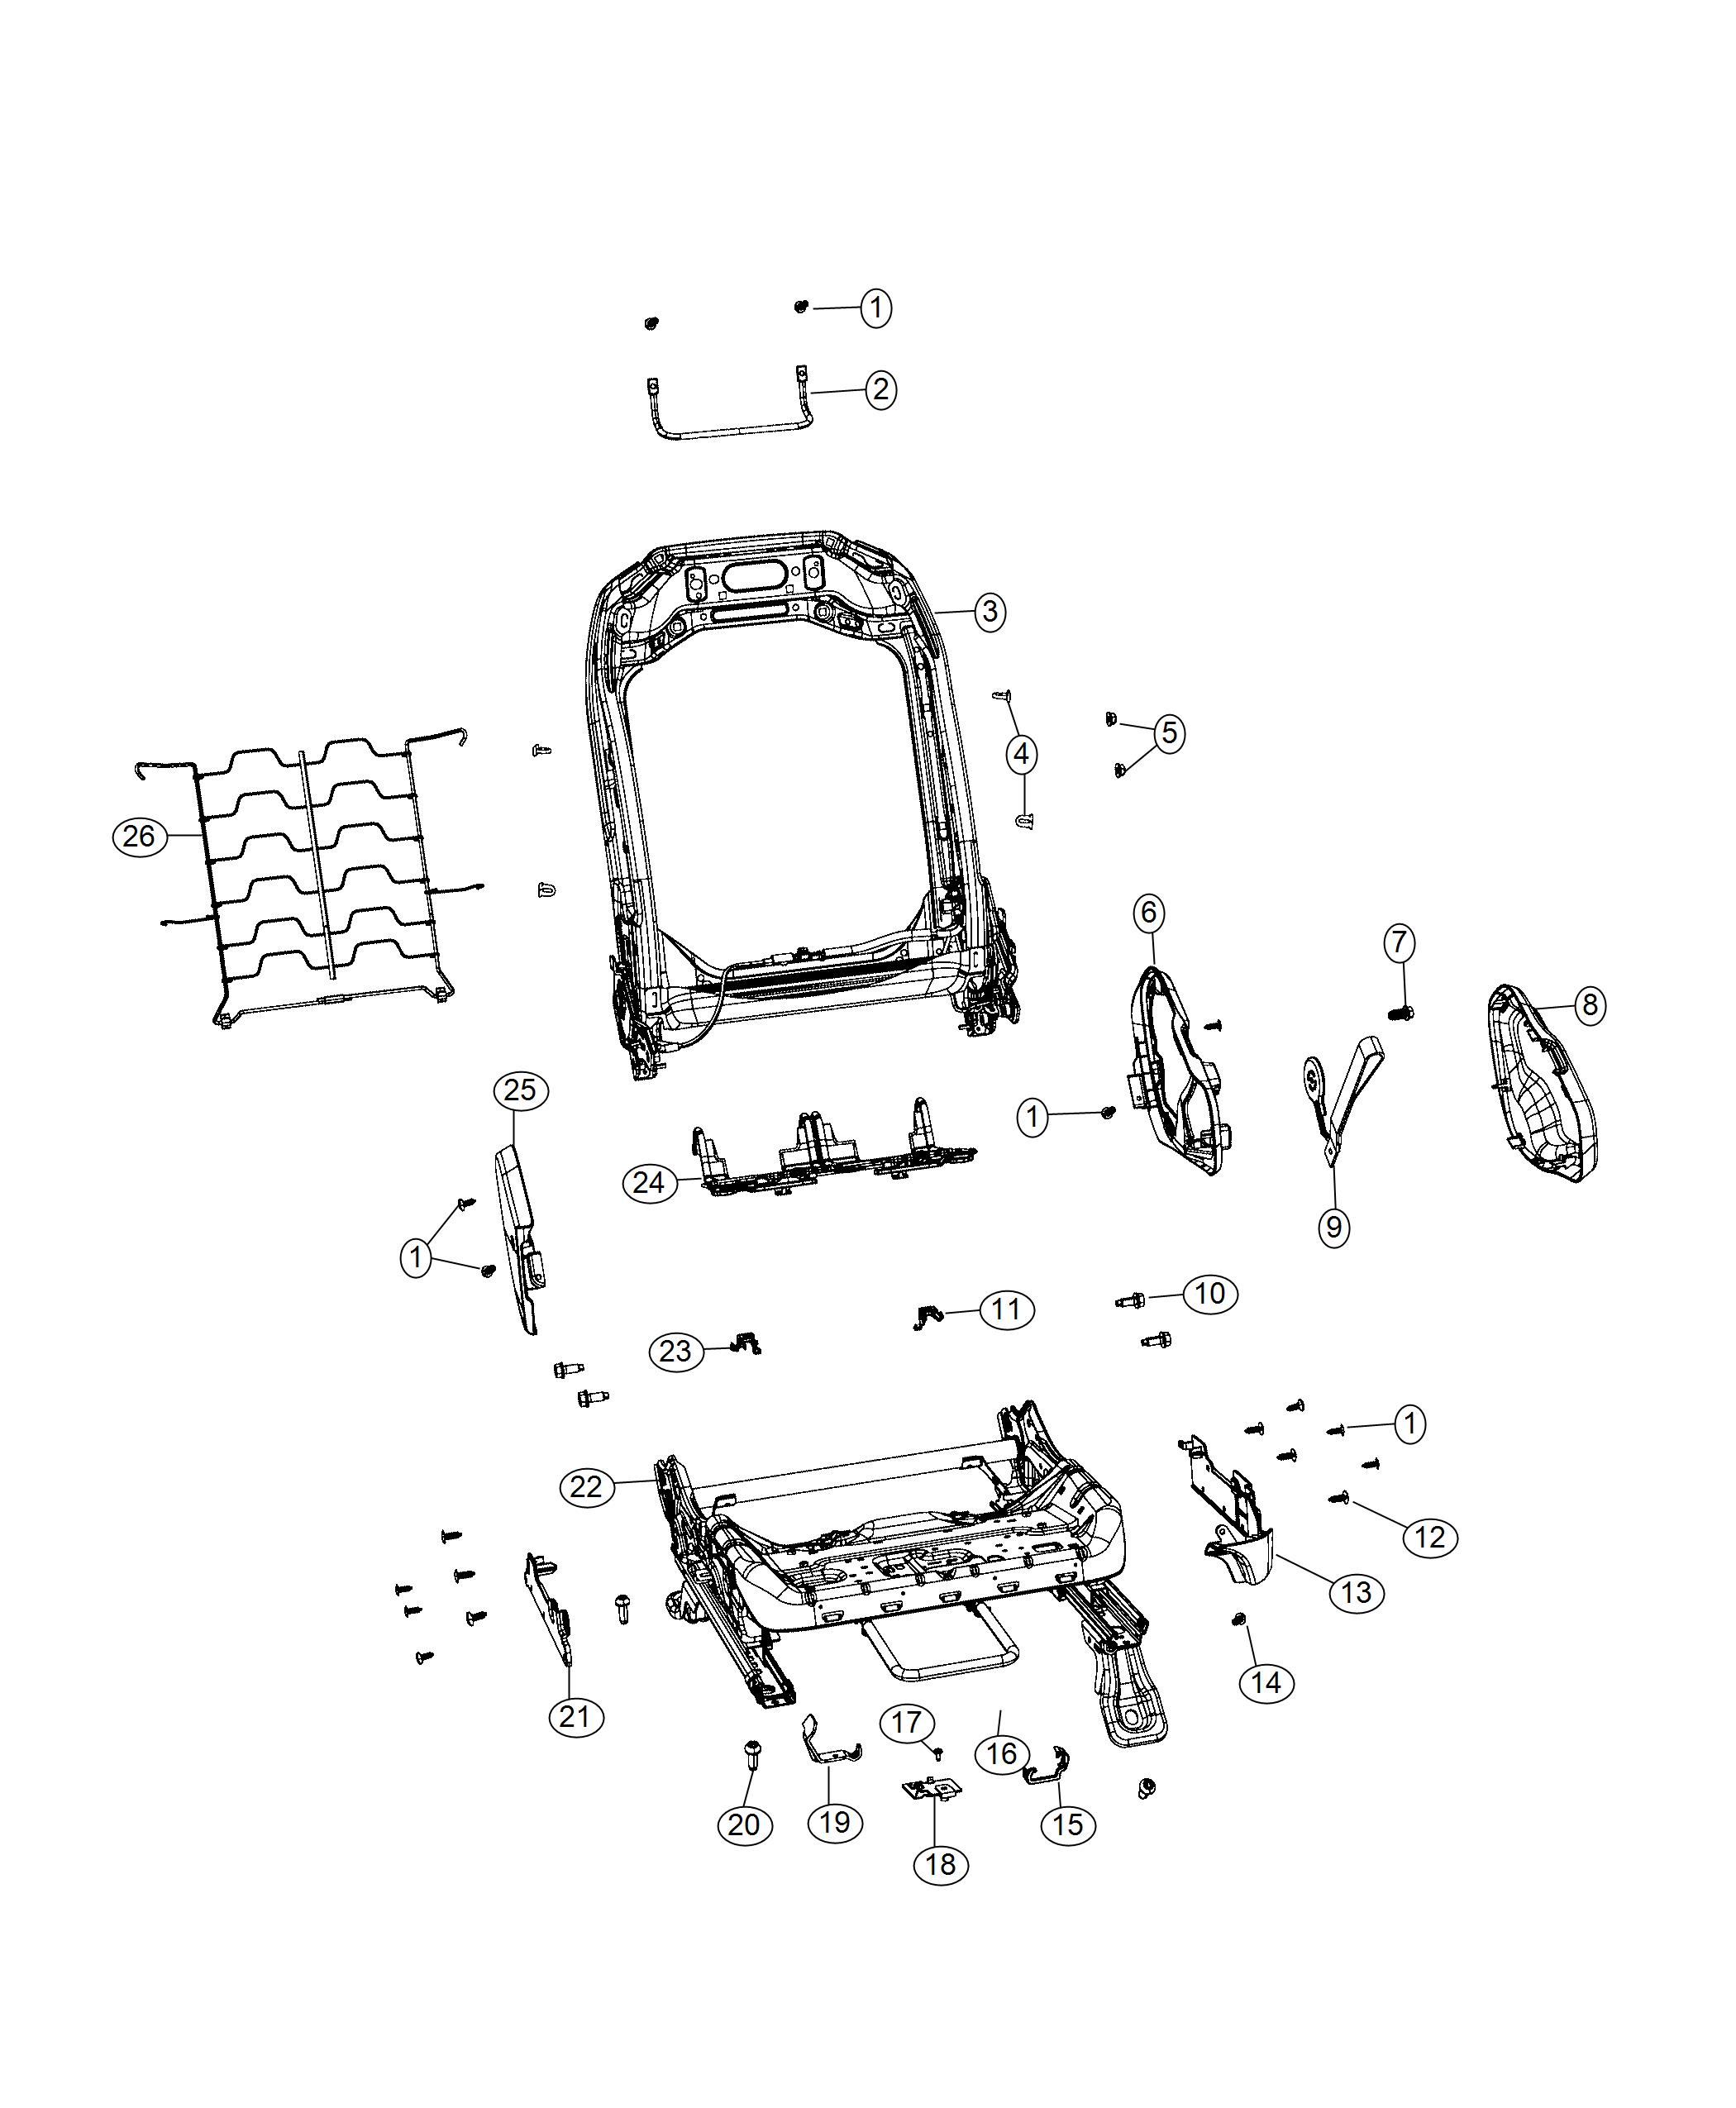 Adjusters, Recliners, Shields and Risers - Passenger Seat - 74 Body. Diagram